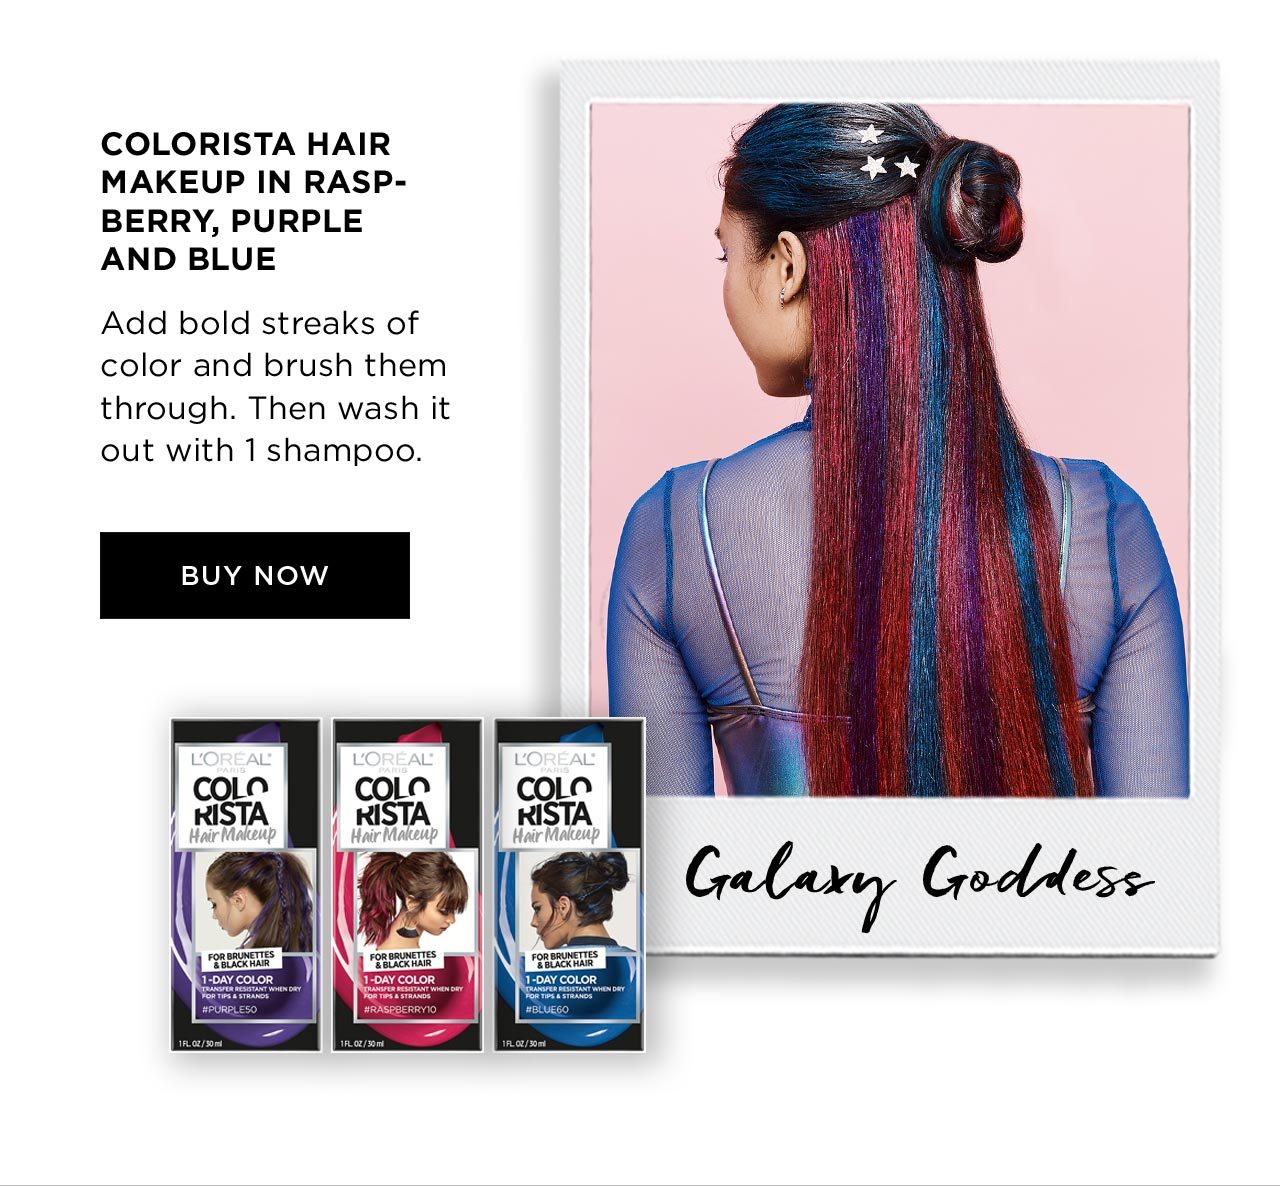 Galaxy Goddess - COLORISTA HAIR MAKEUP IN RASP-BERRY, PURPLE AND BLUE - Add bold streaks of color and brush them through. Then wash it out with 1 shampoo. - BUY NOW